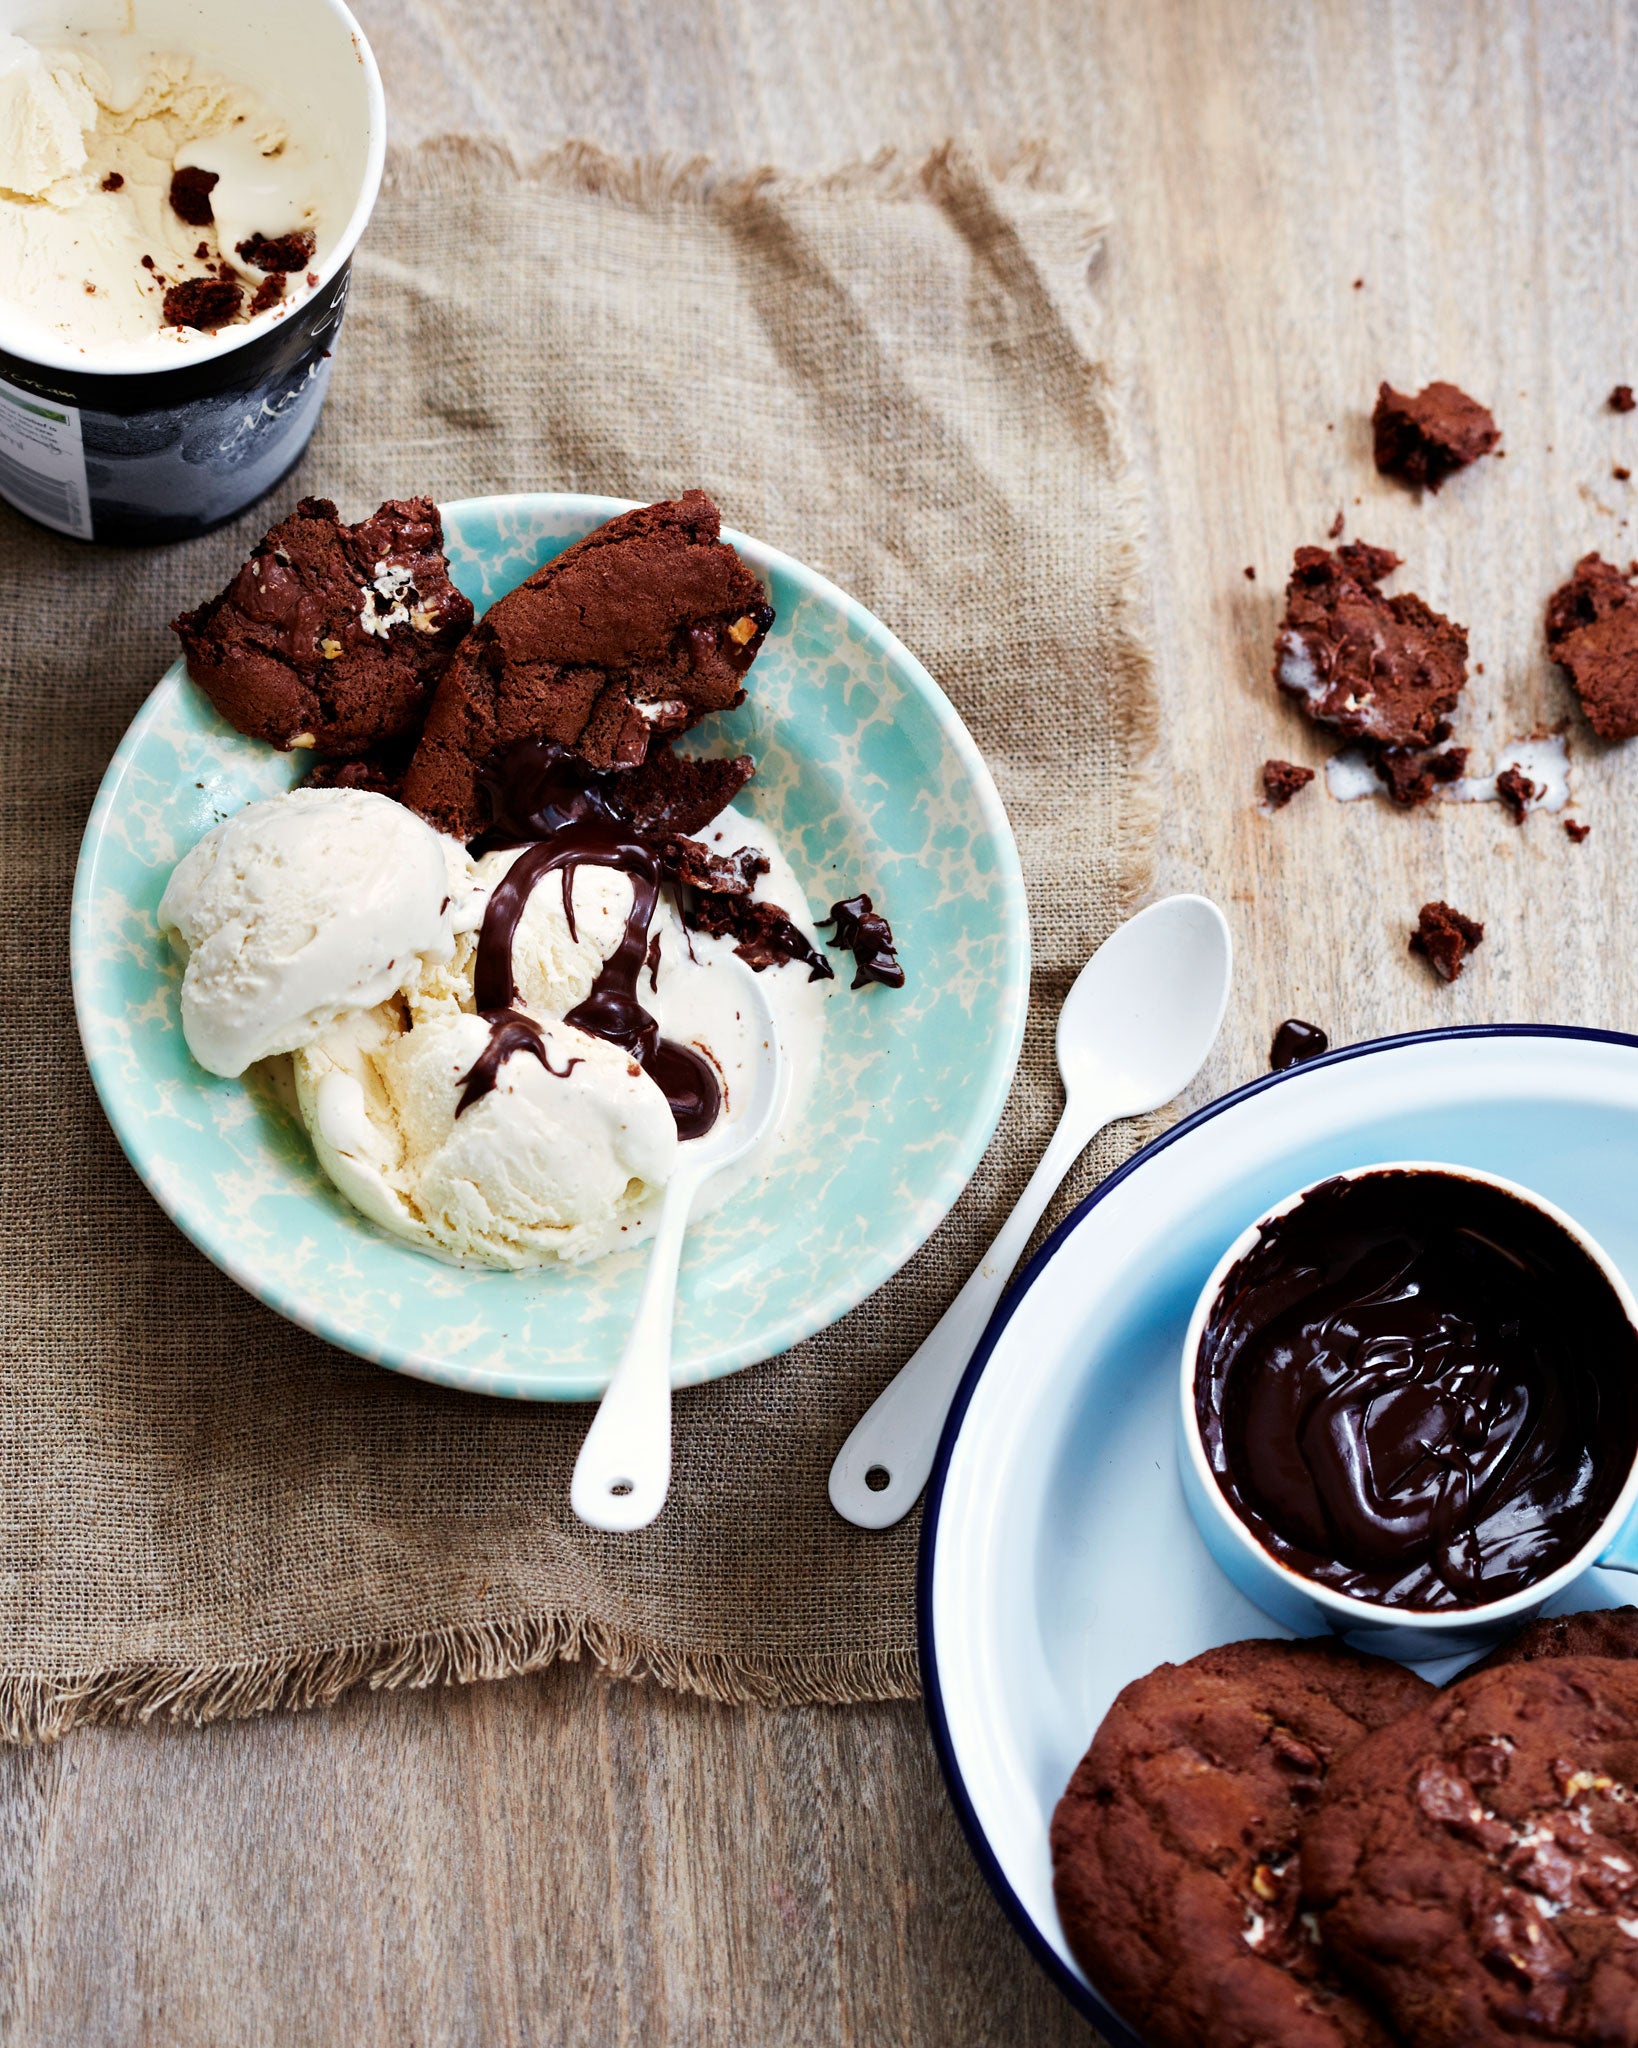 Toblerone cookies with ice cream and chocolate sauce